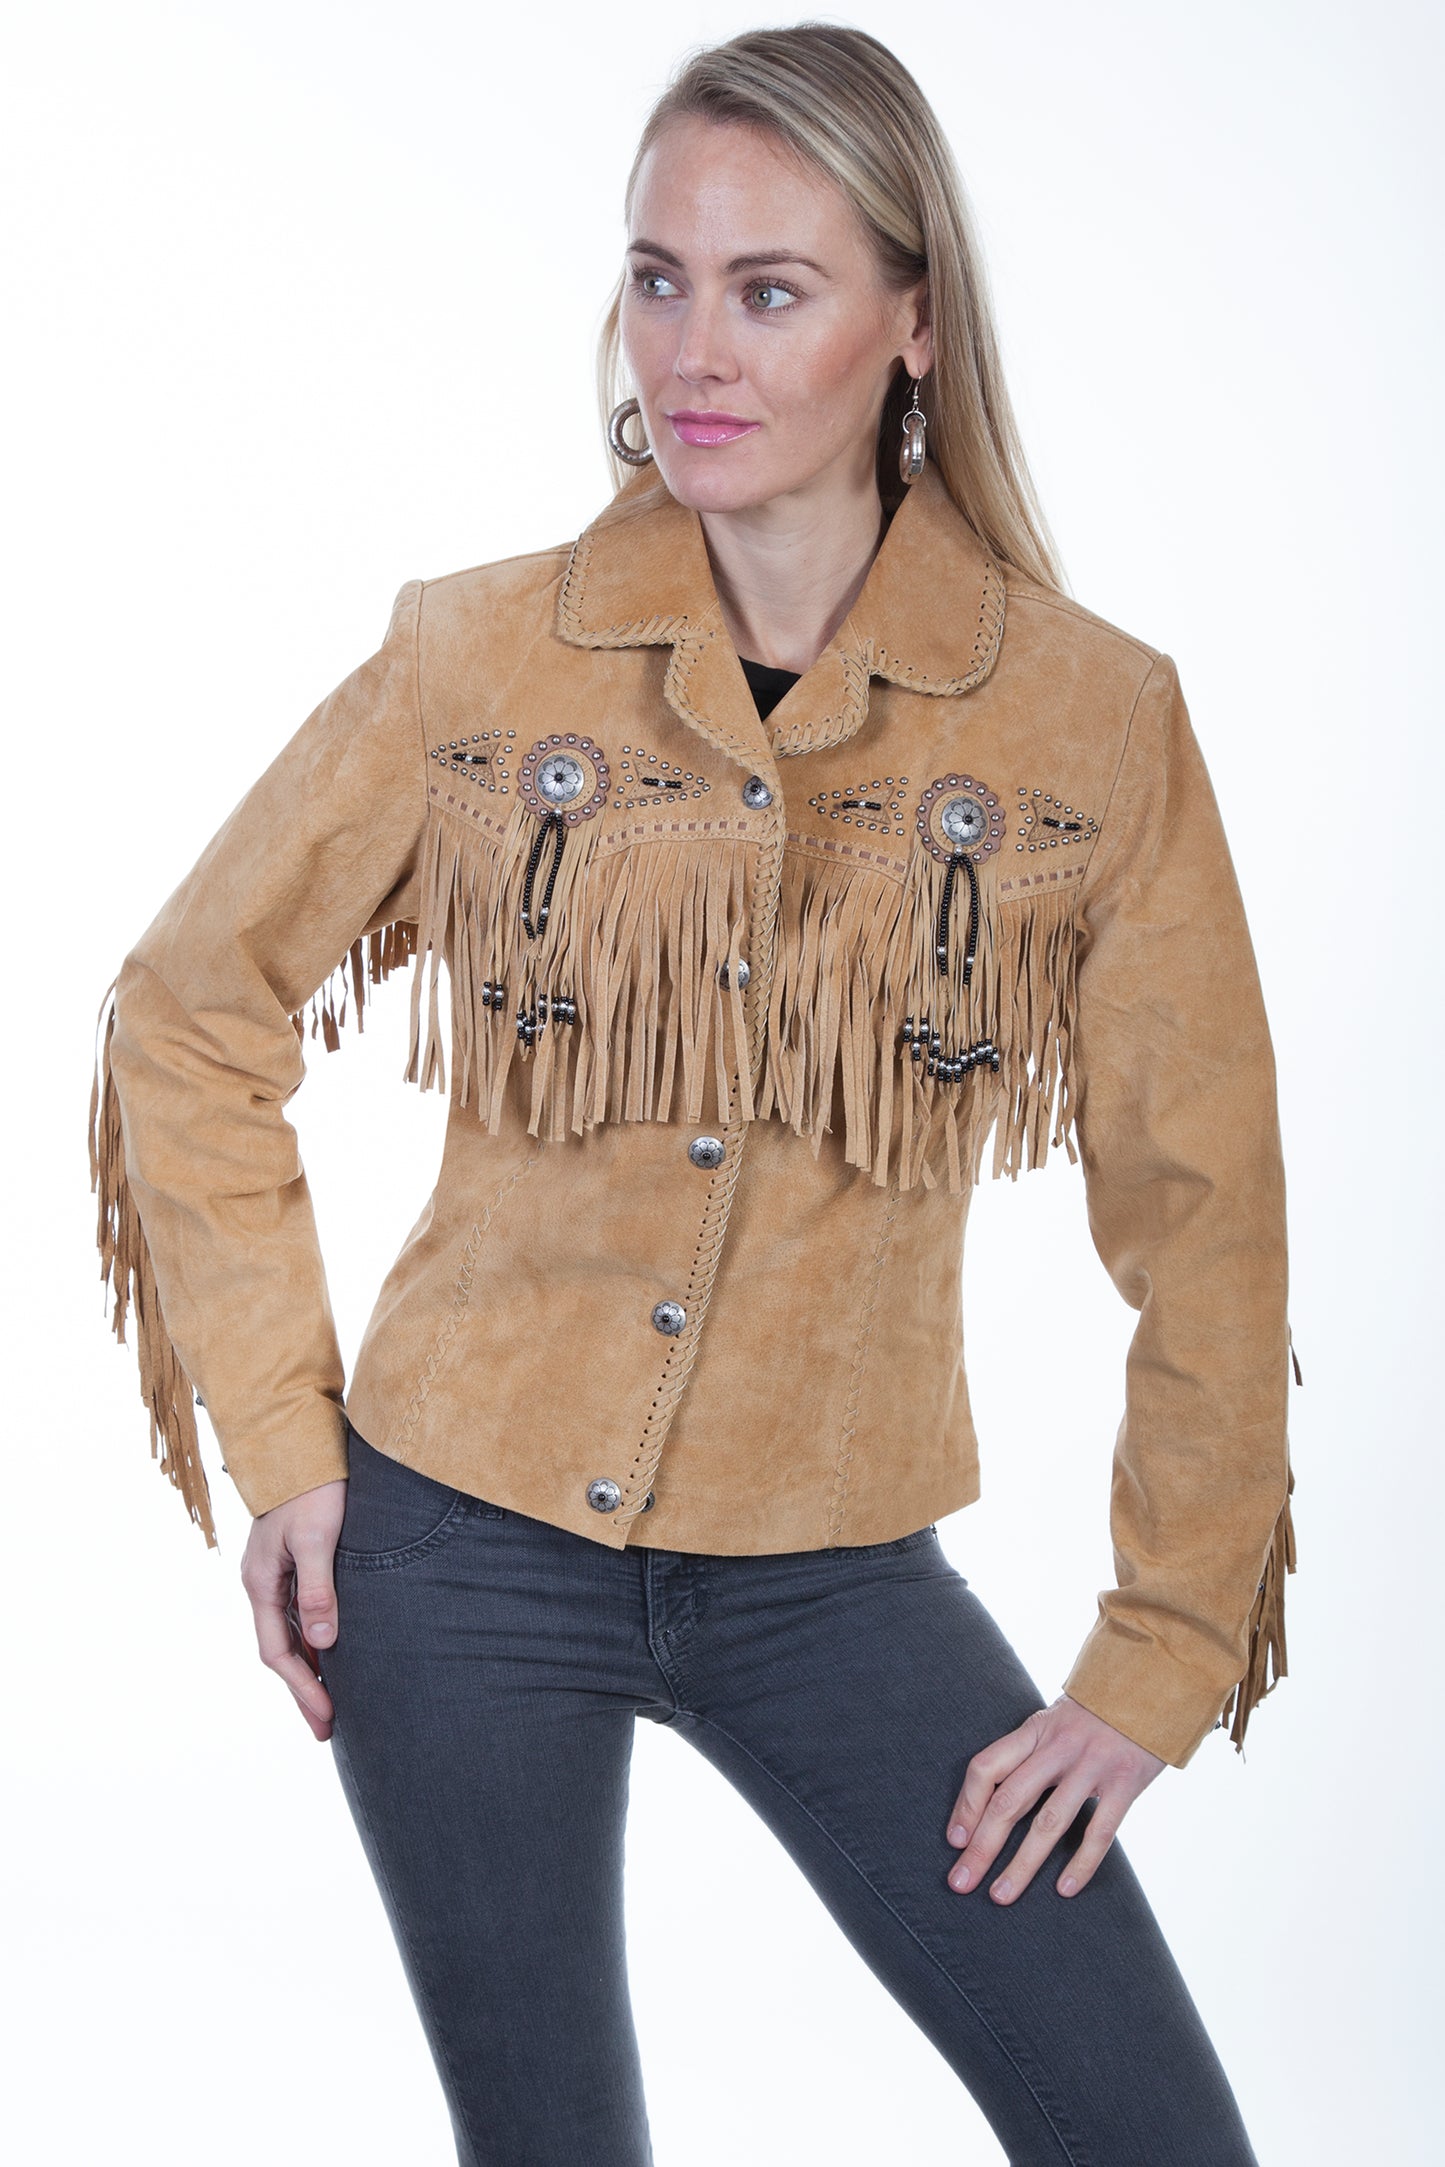 Old Rust Fringe & Beaded Suede Jacket at Bourbon Cowgirl